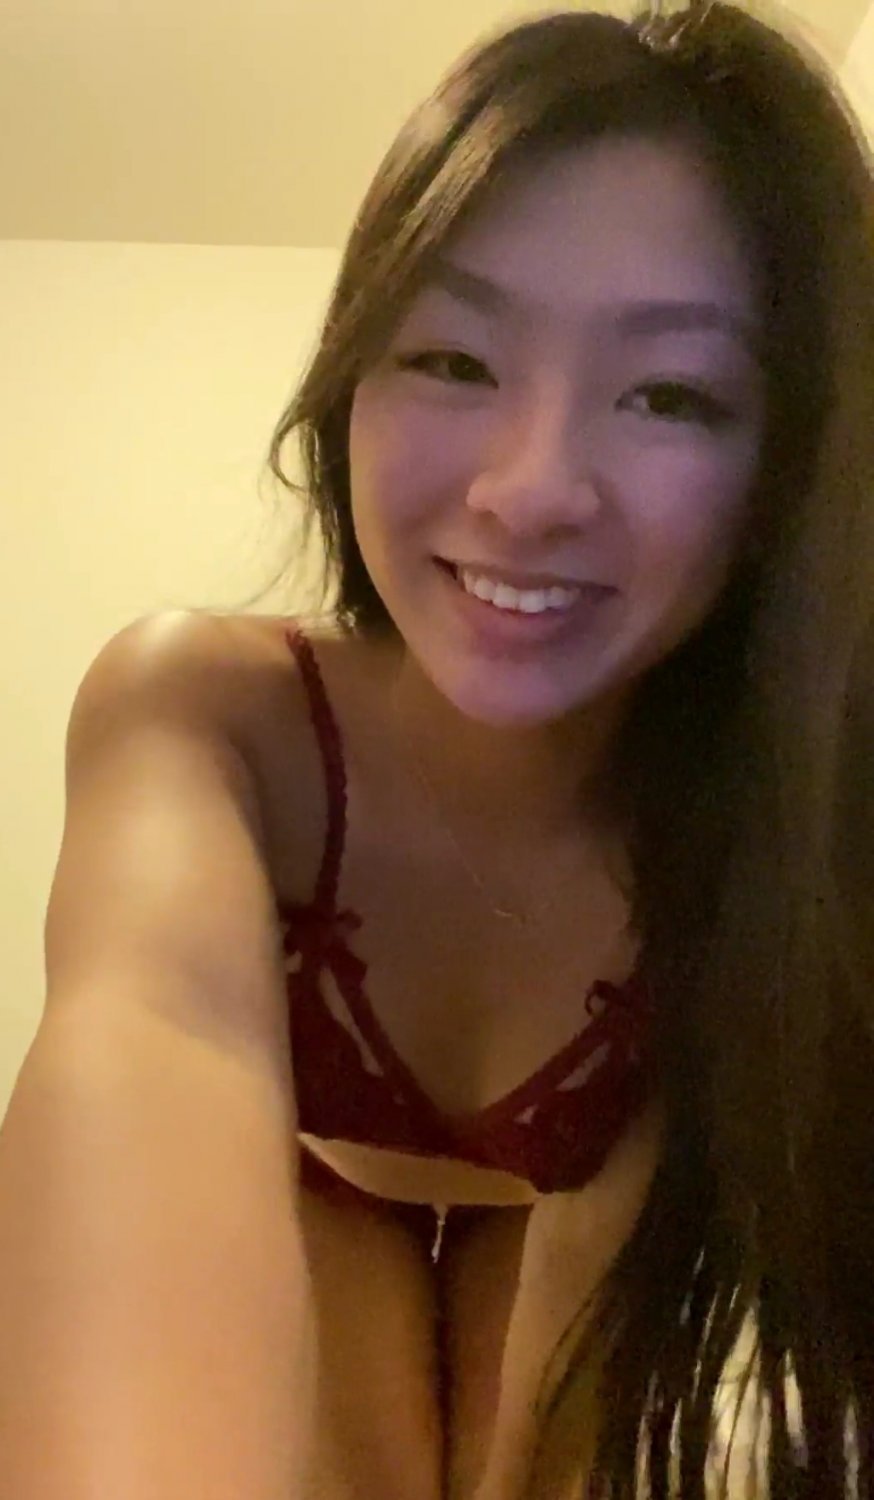 Asian hot girlfriend willing to do it all amateur link in bio...